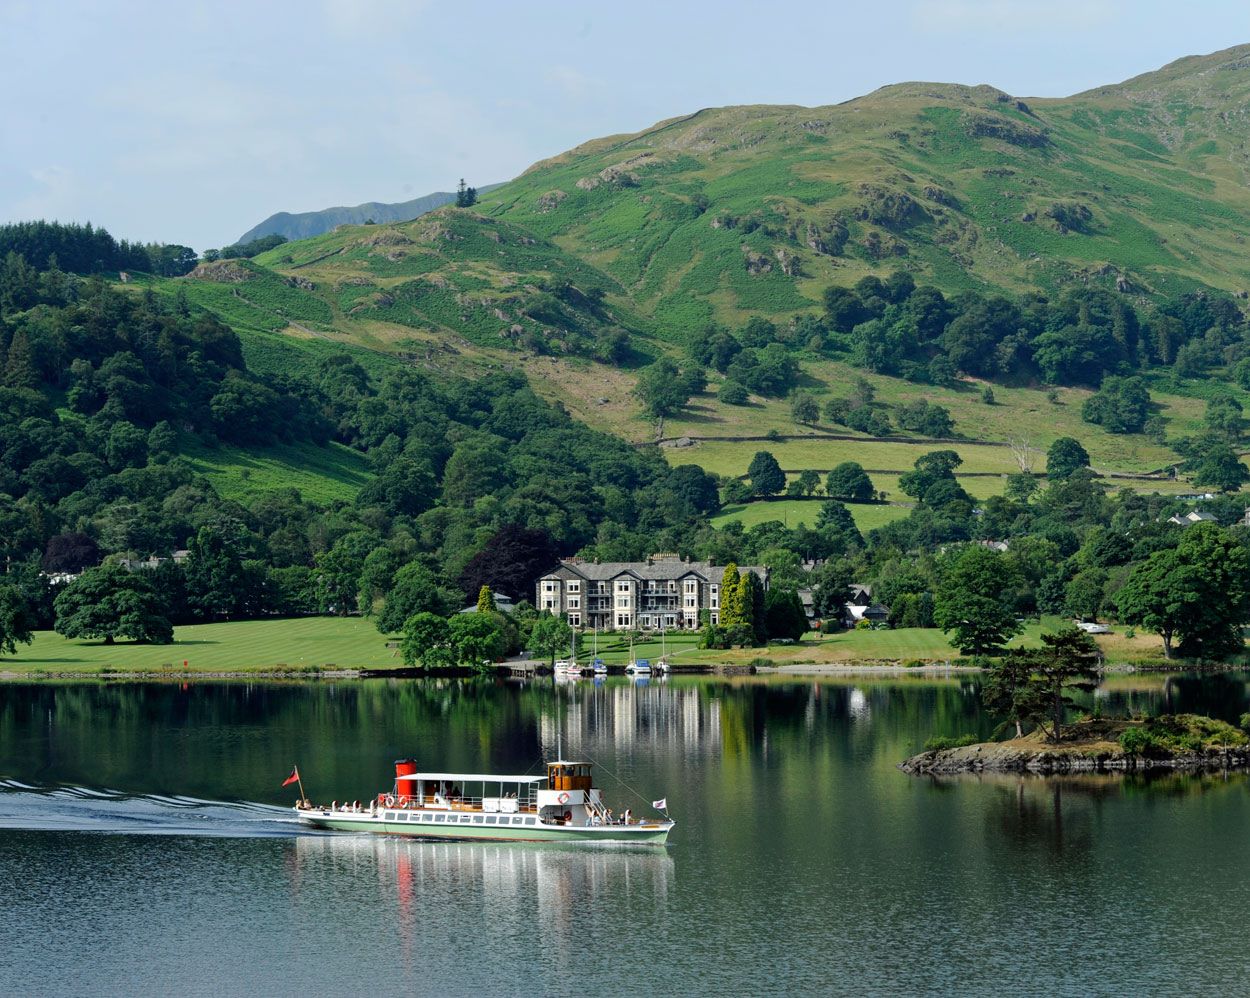 Lake District Travel Guide - Travel to Cumbria England